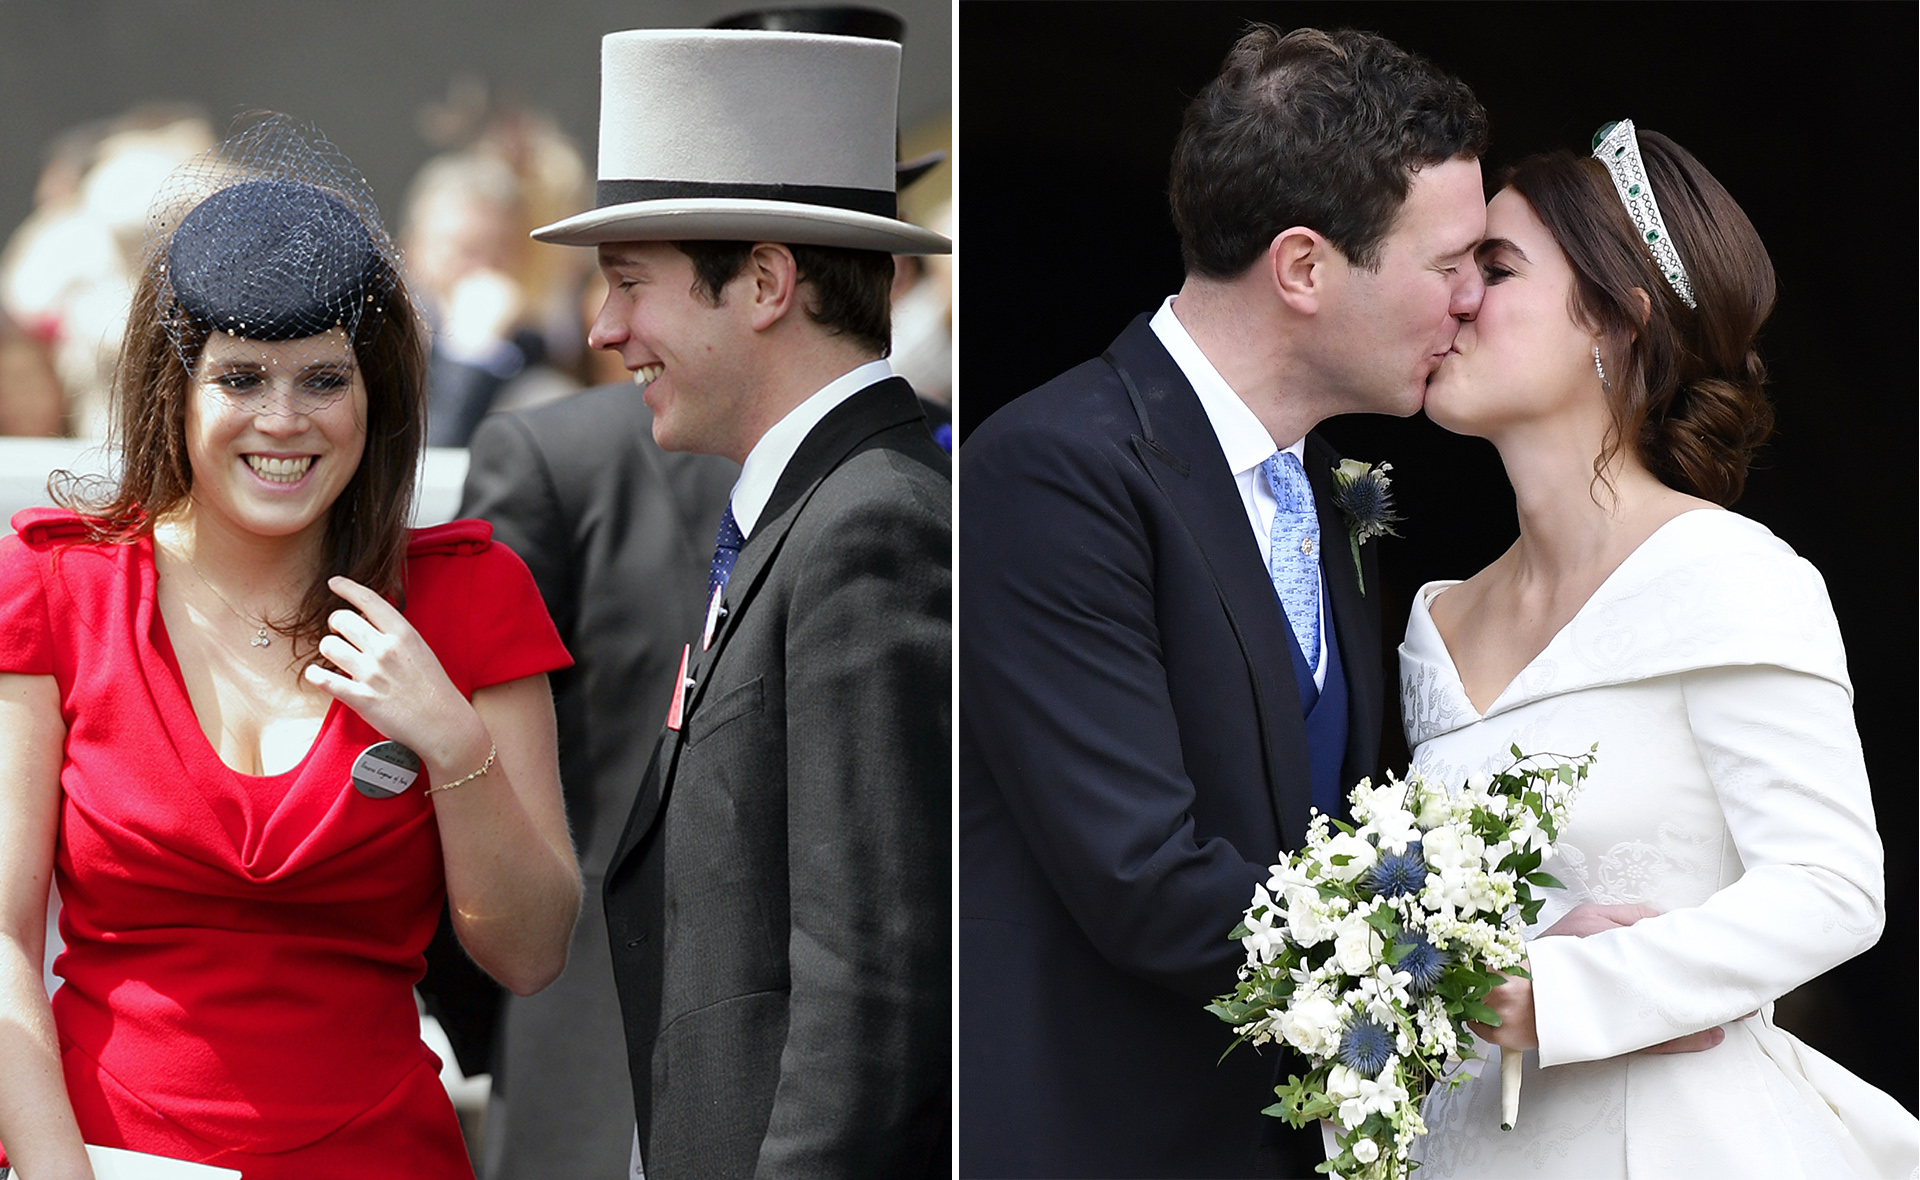 How a chance meeting in the snow turned into royal romance for Princess Eugenie and husband Jack Brooksbank